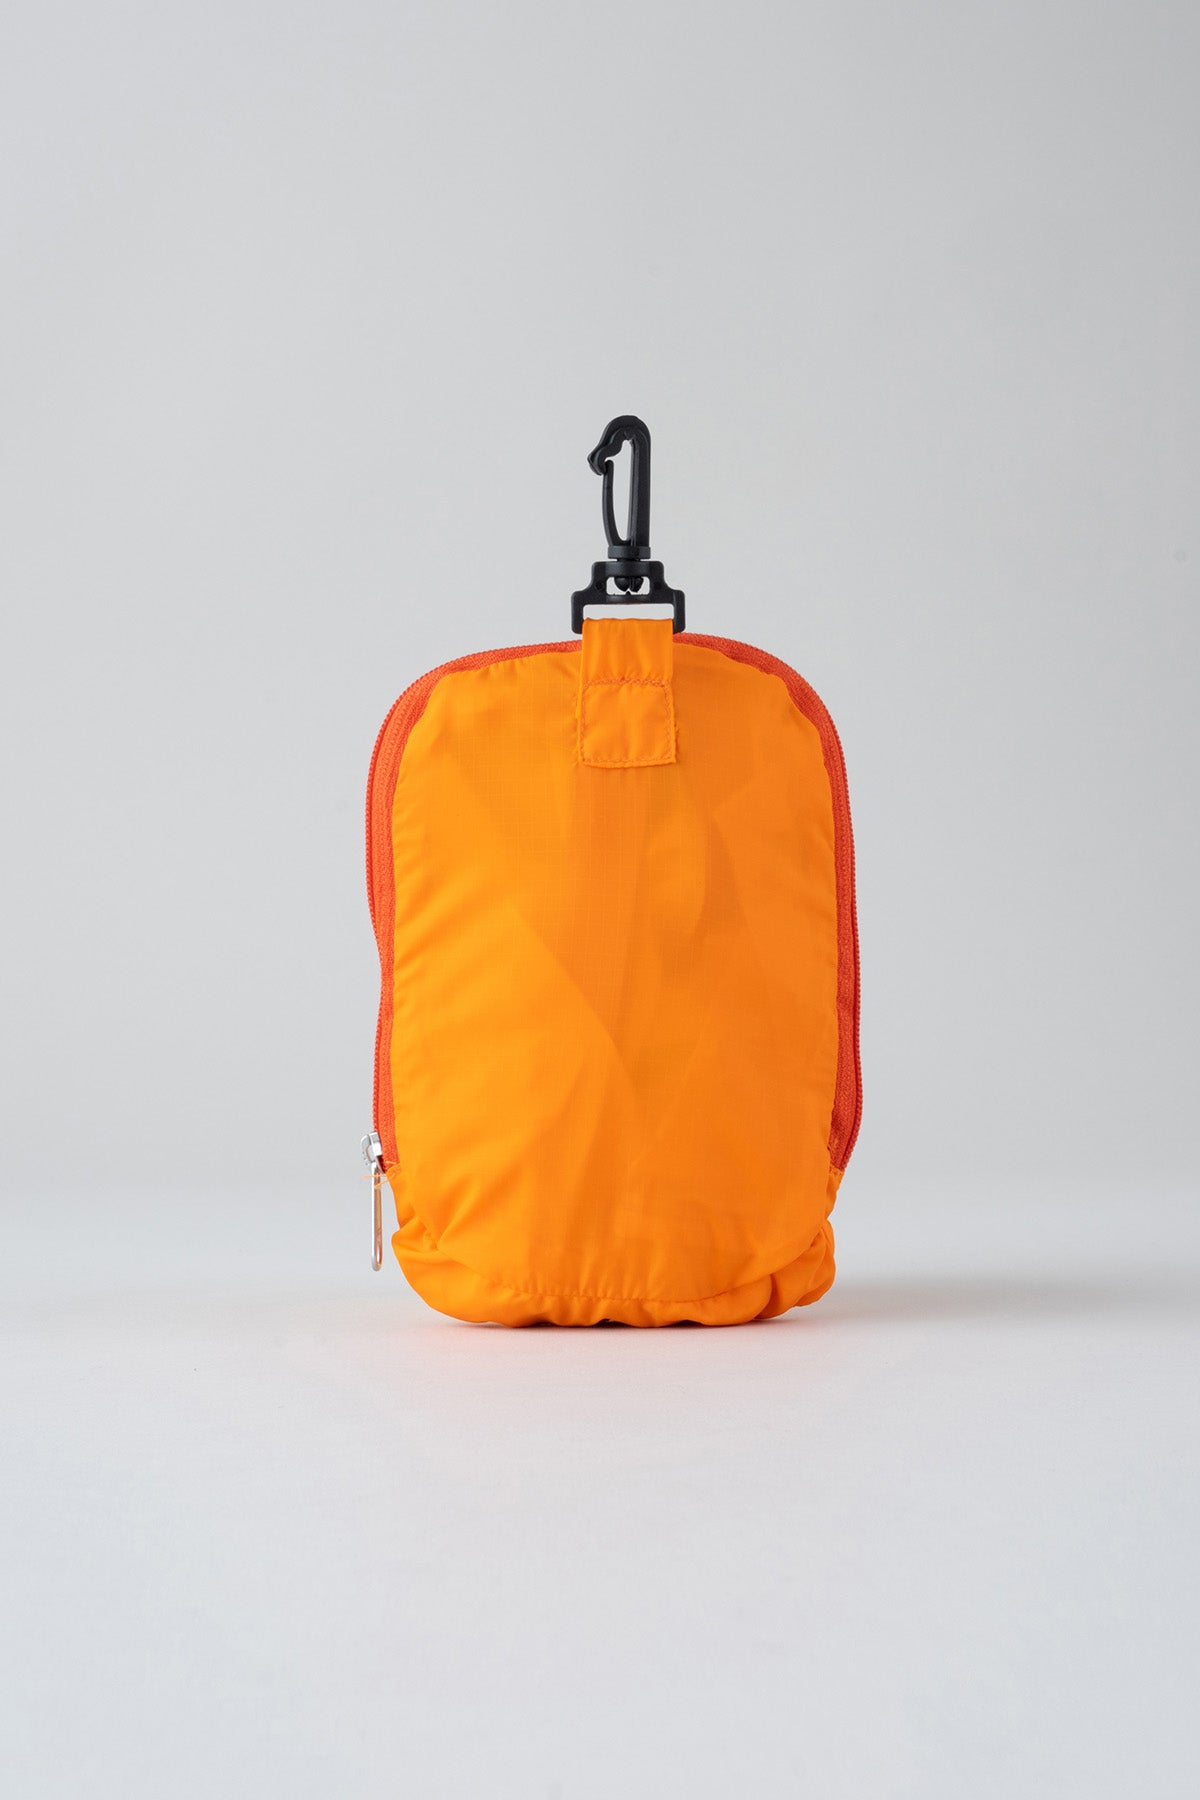 PACKABLE UTILITY POUCH